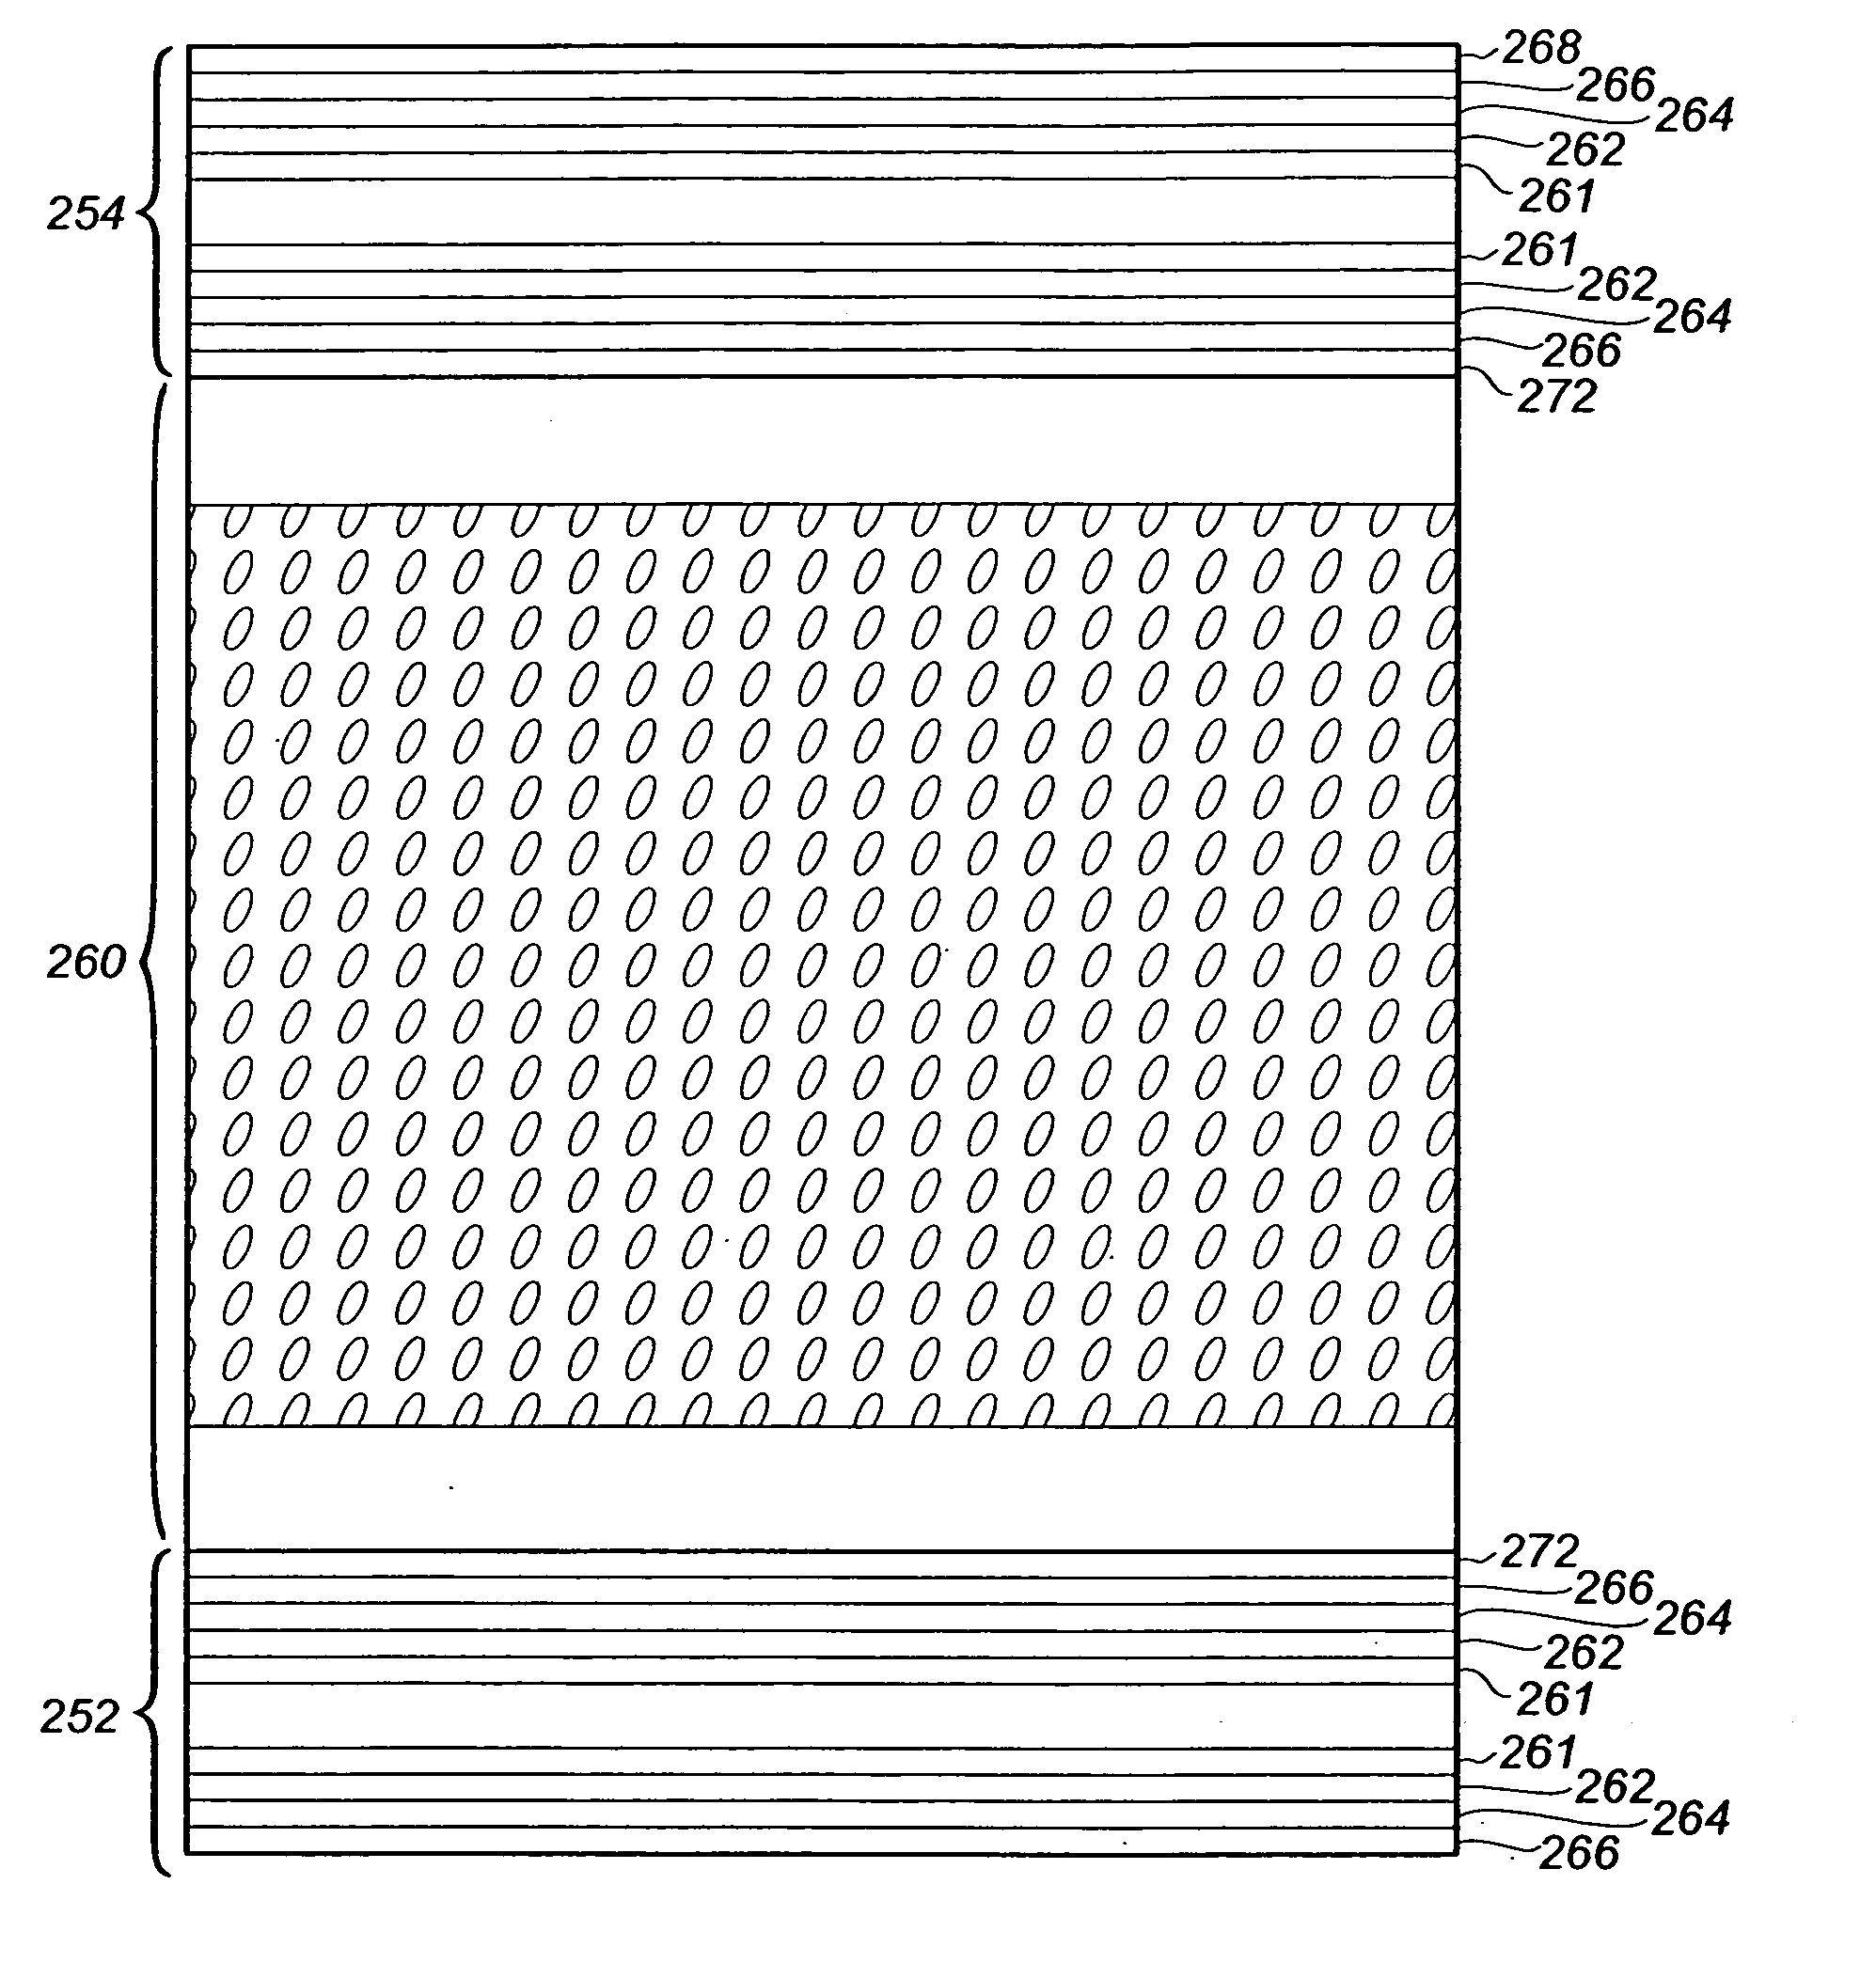 Polarizing plate laminated with an improved glue composition and a method of manufacturing the same